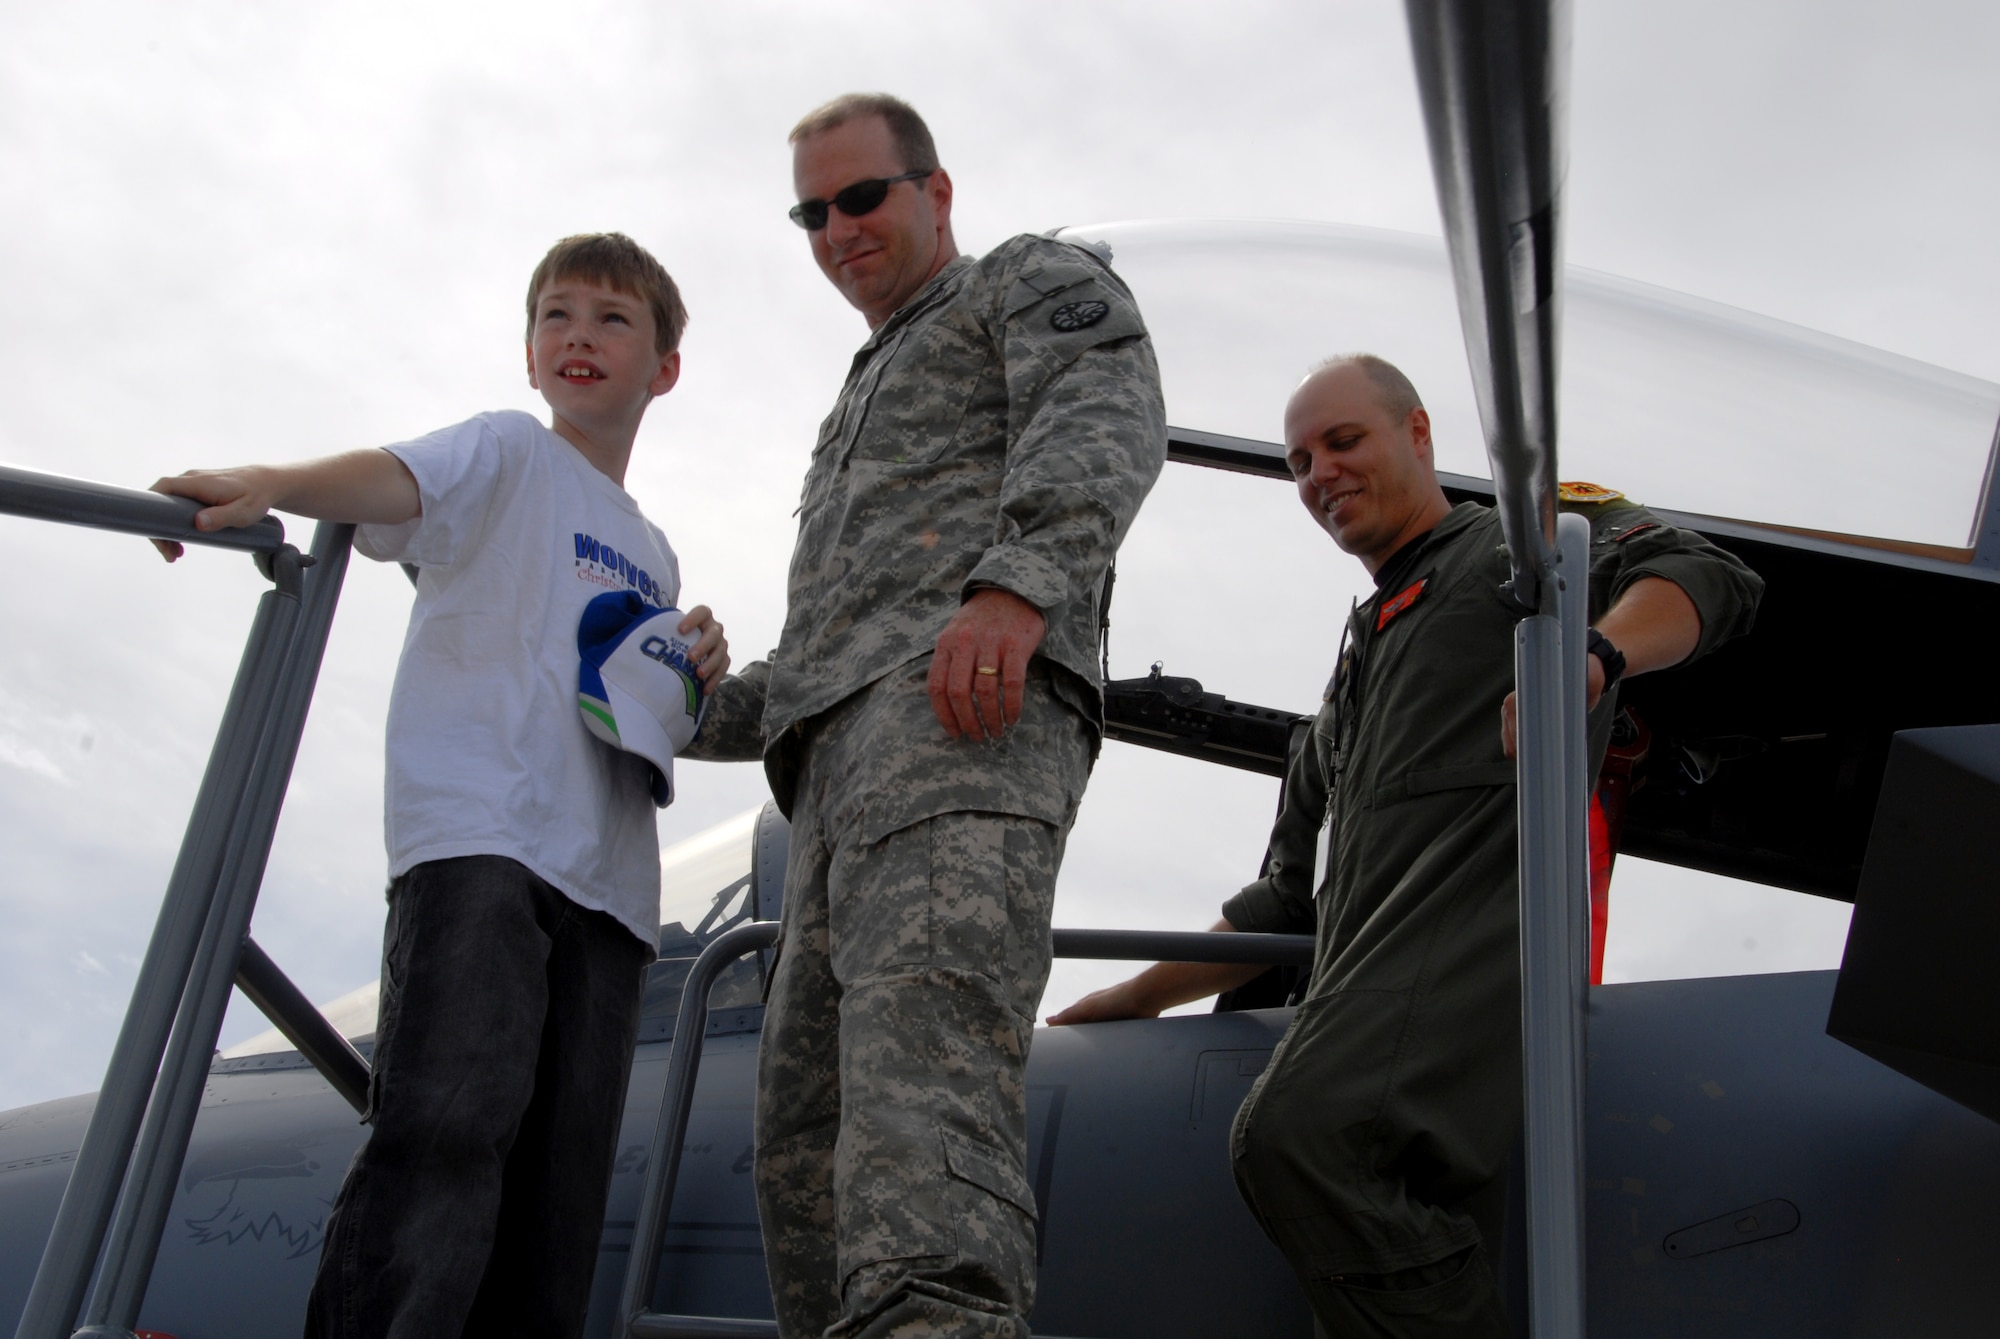 Sergeant Robert Toronto from the Idaho Army National Guard and his son Sean get a tour of the F-15 cockpit from Major David Neal Unruh from the 173 Fighter Wing of Oregon on July 12, 2009. (Air Force photo by Tech Sgt Becky Vanshur)(Released)